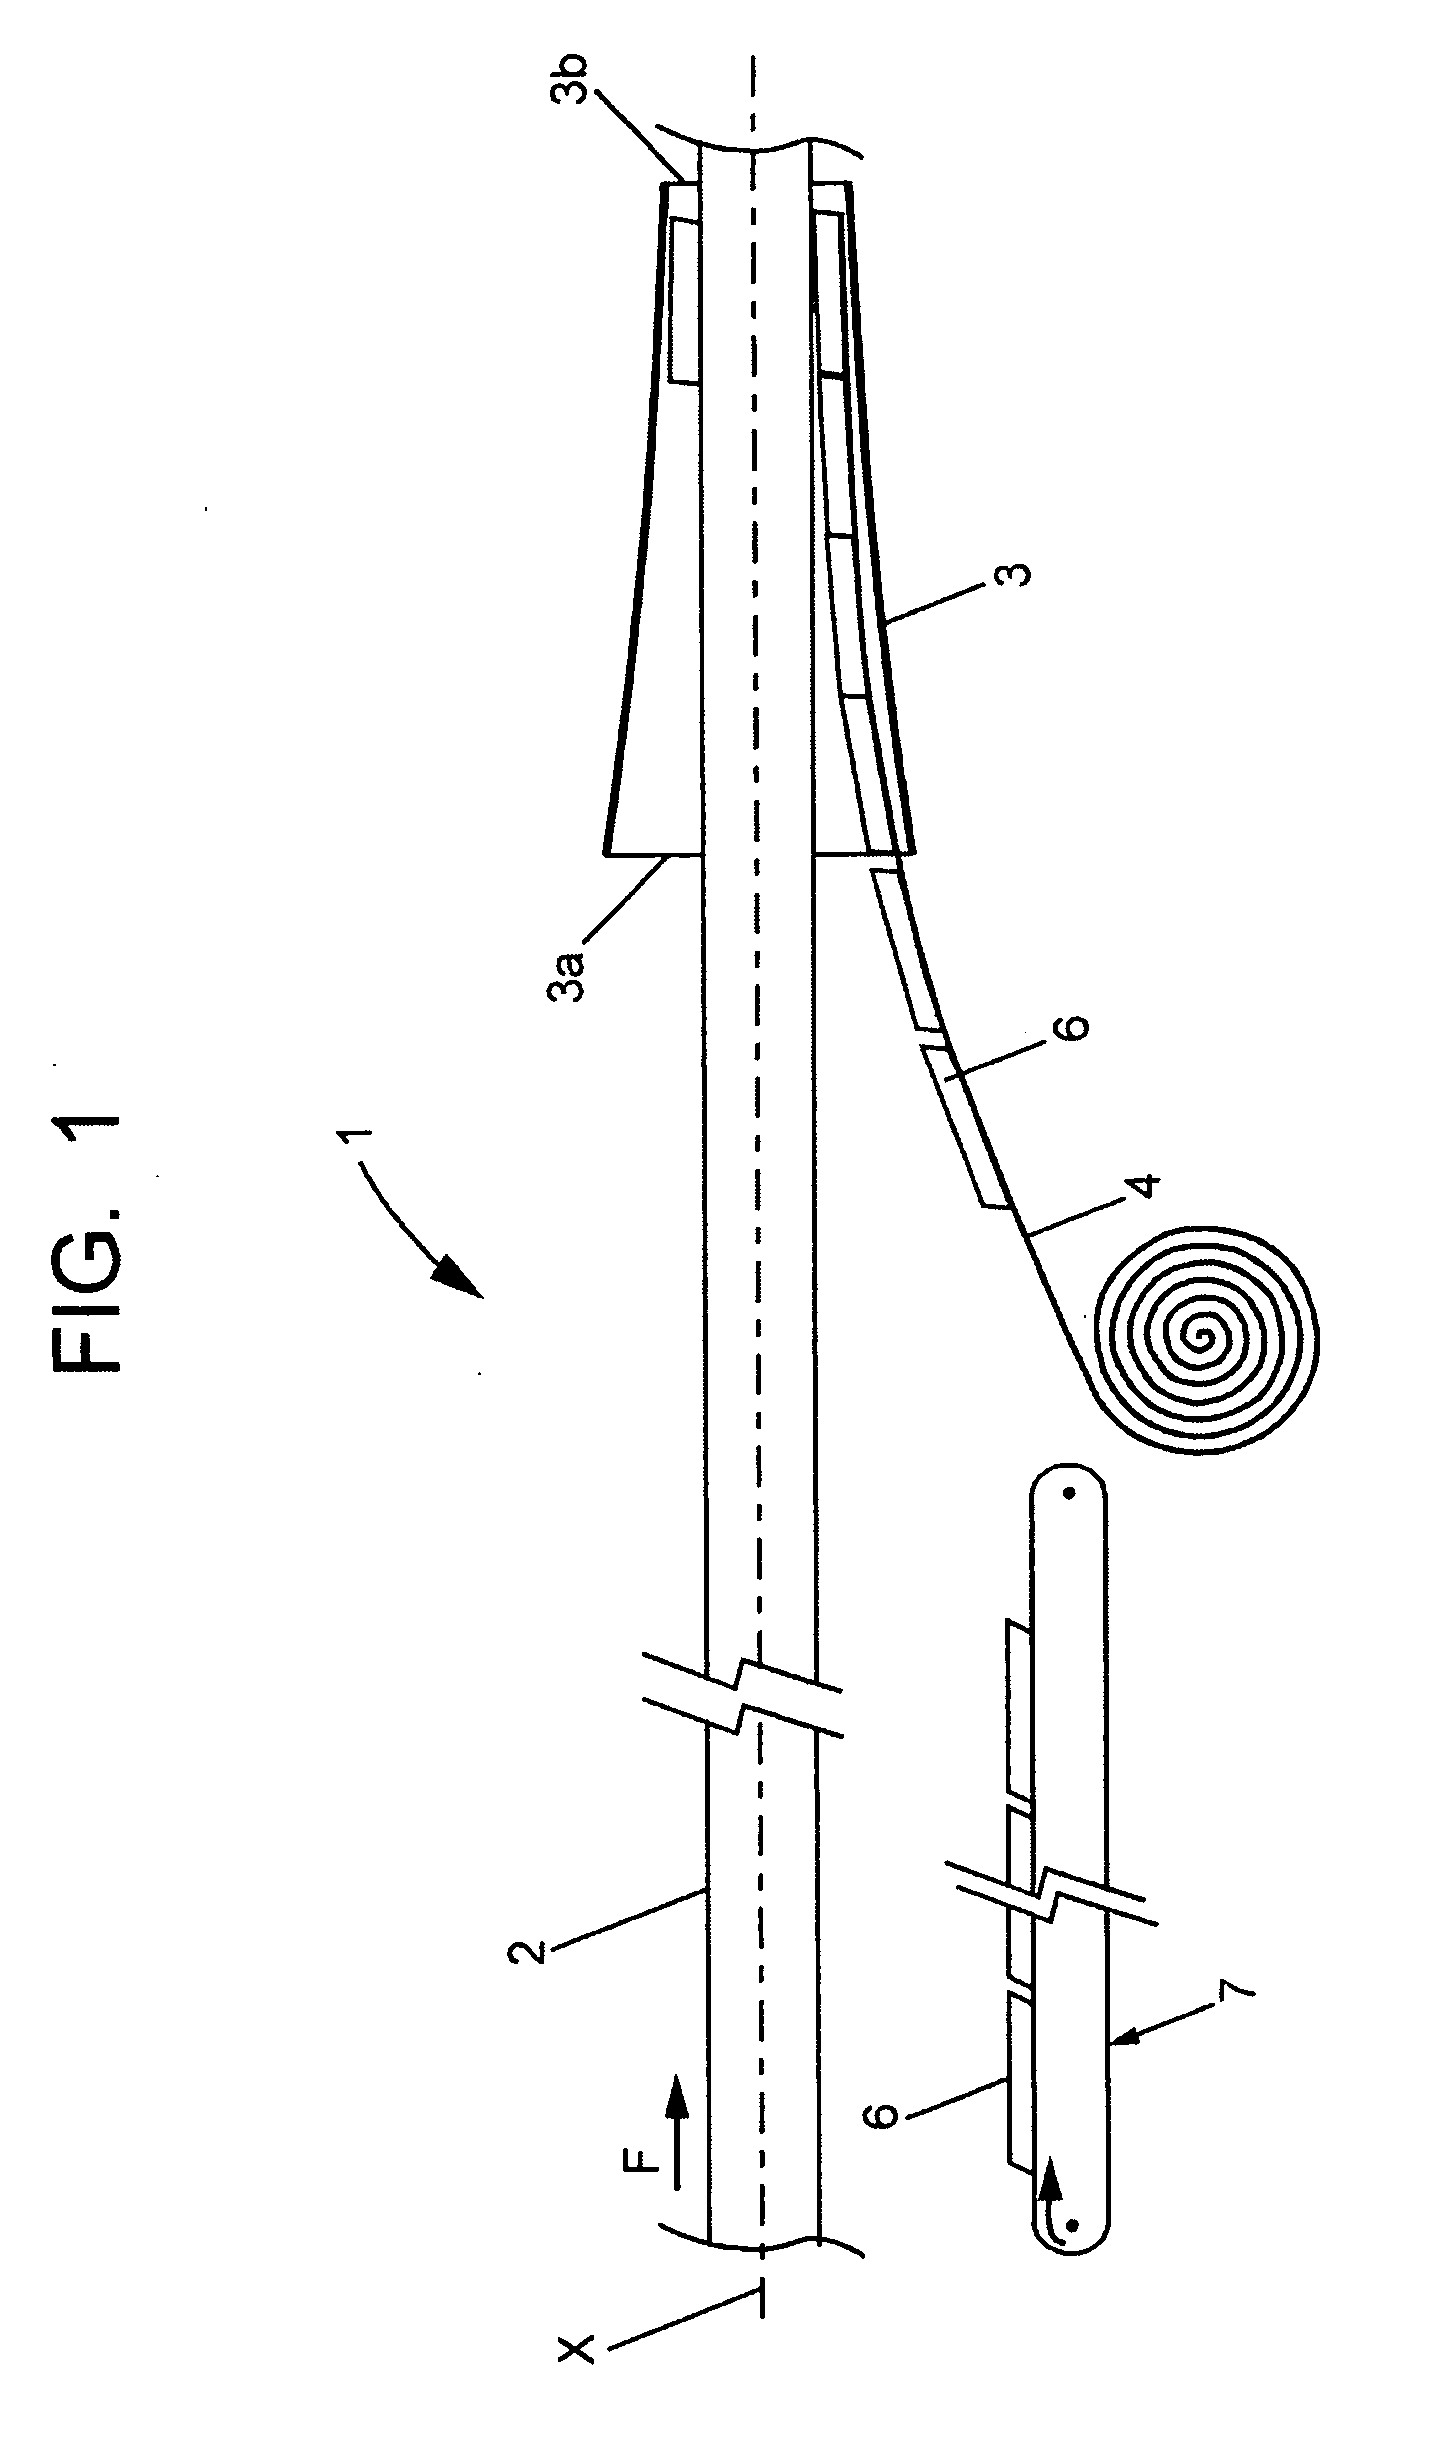 Process of continuous manufacturing and installation of a thermally or electrically insulated tube or cable